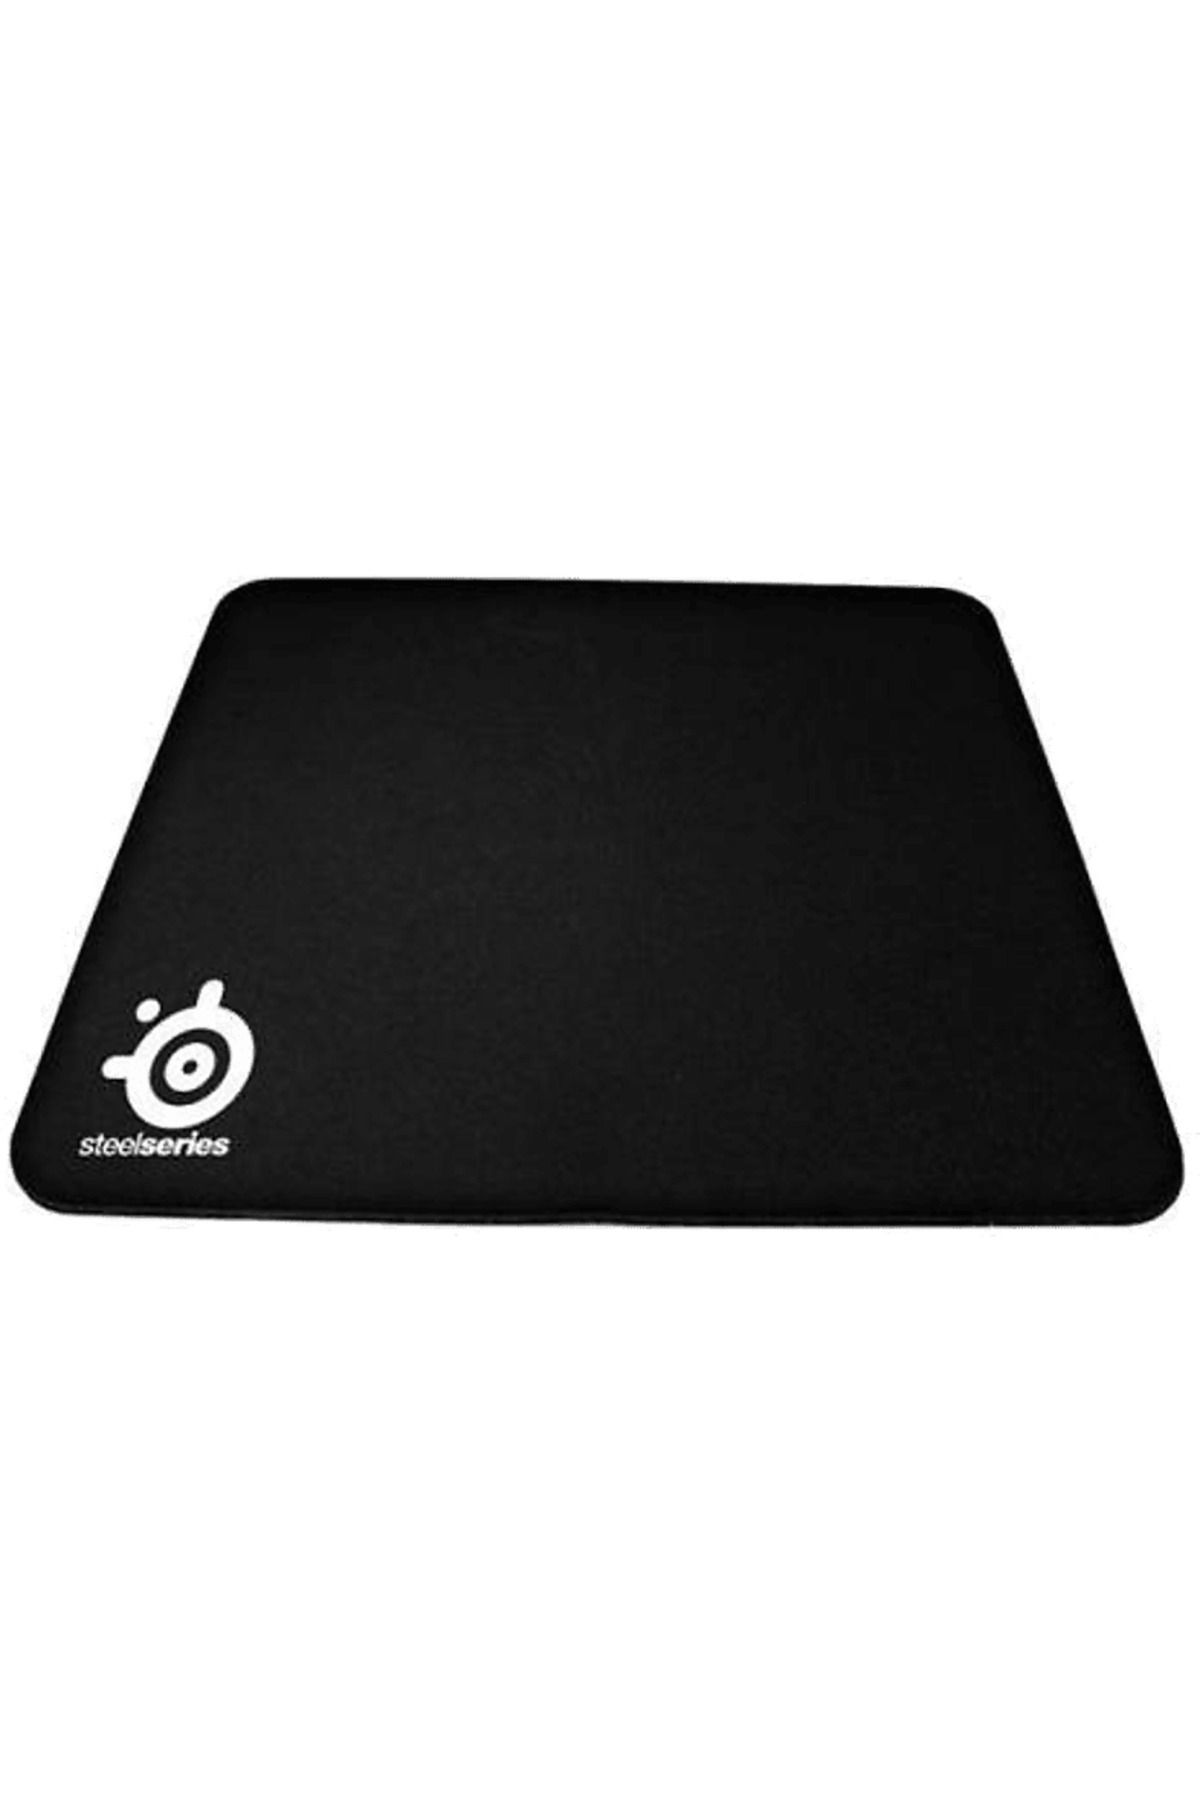 SteelSeries QcK Heavy Mouse Pad SSMP63008